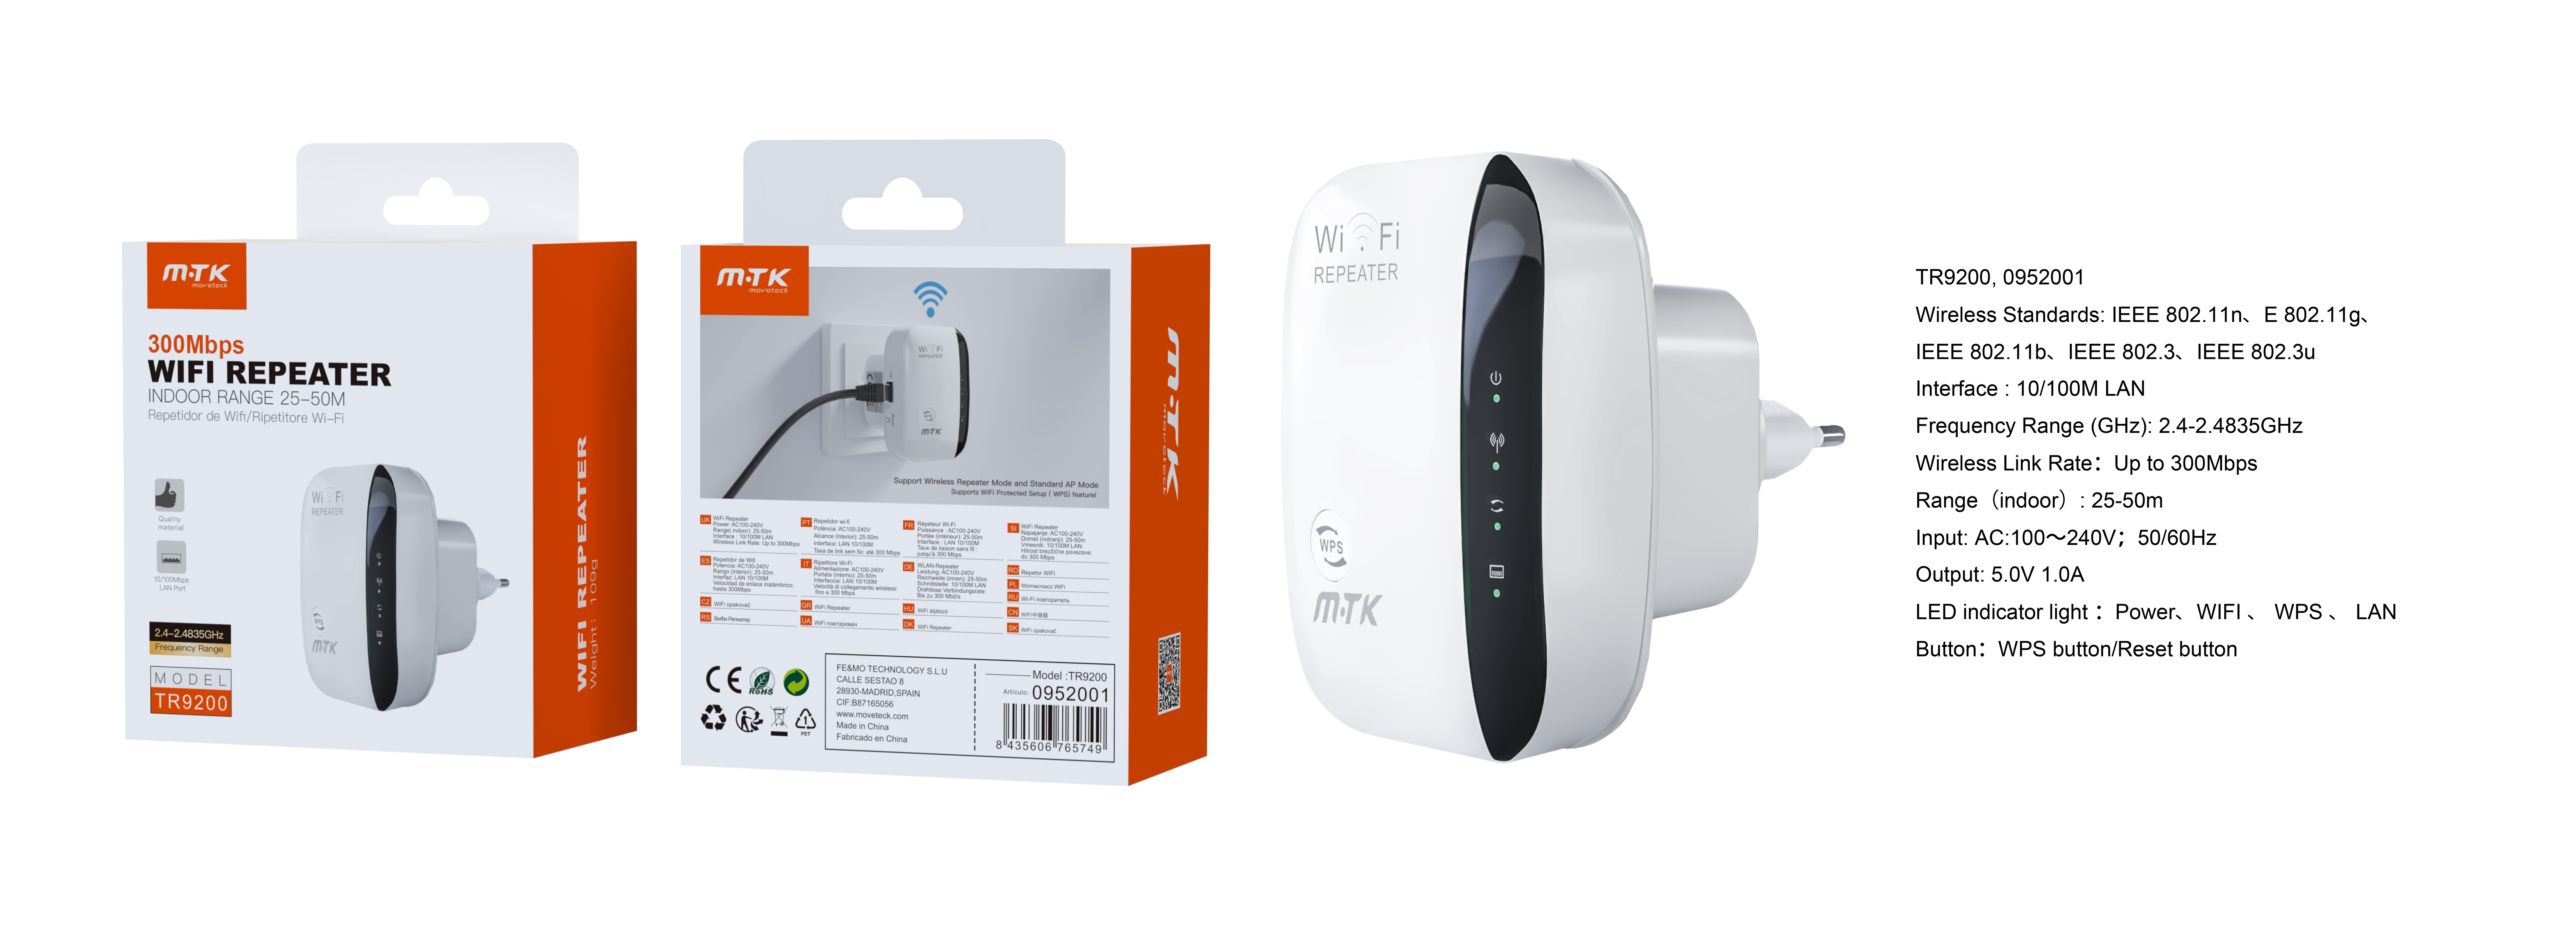 TR9200 BL Repetidor Wifi Inalambrico 2.4GHz, Velocidad 300Mbps, Blanco